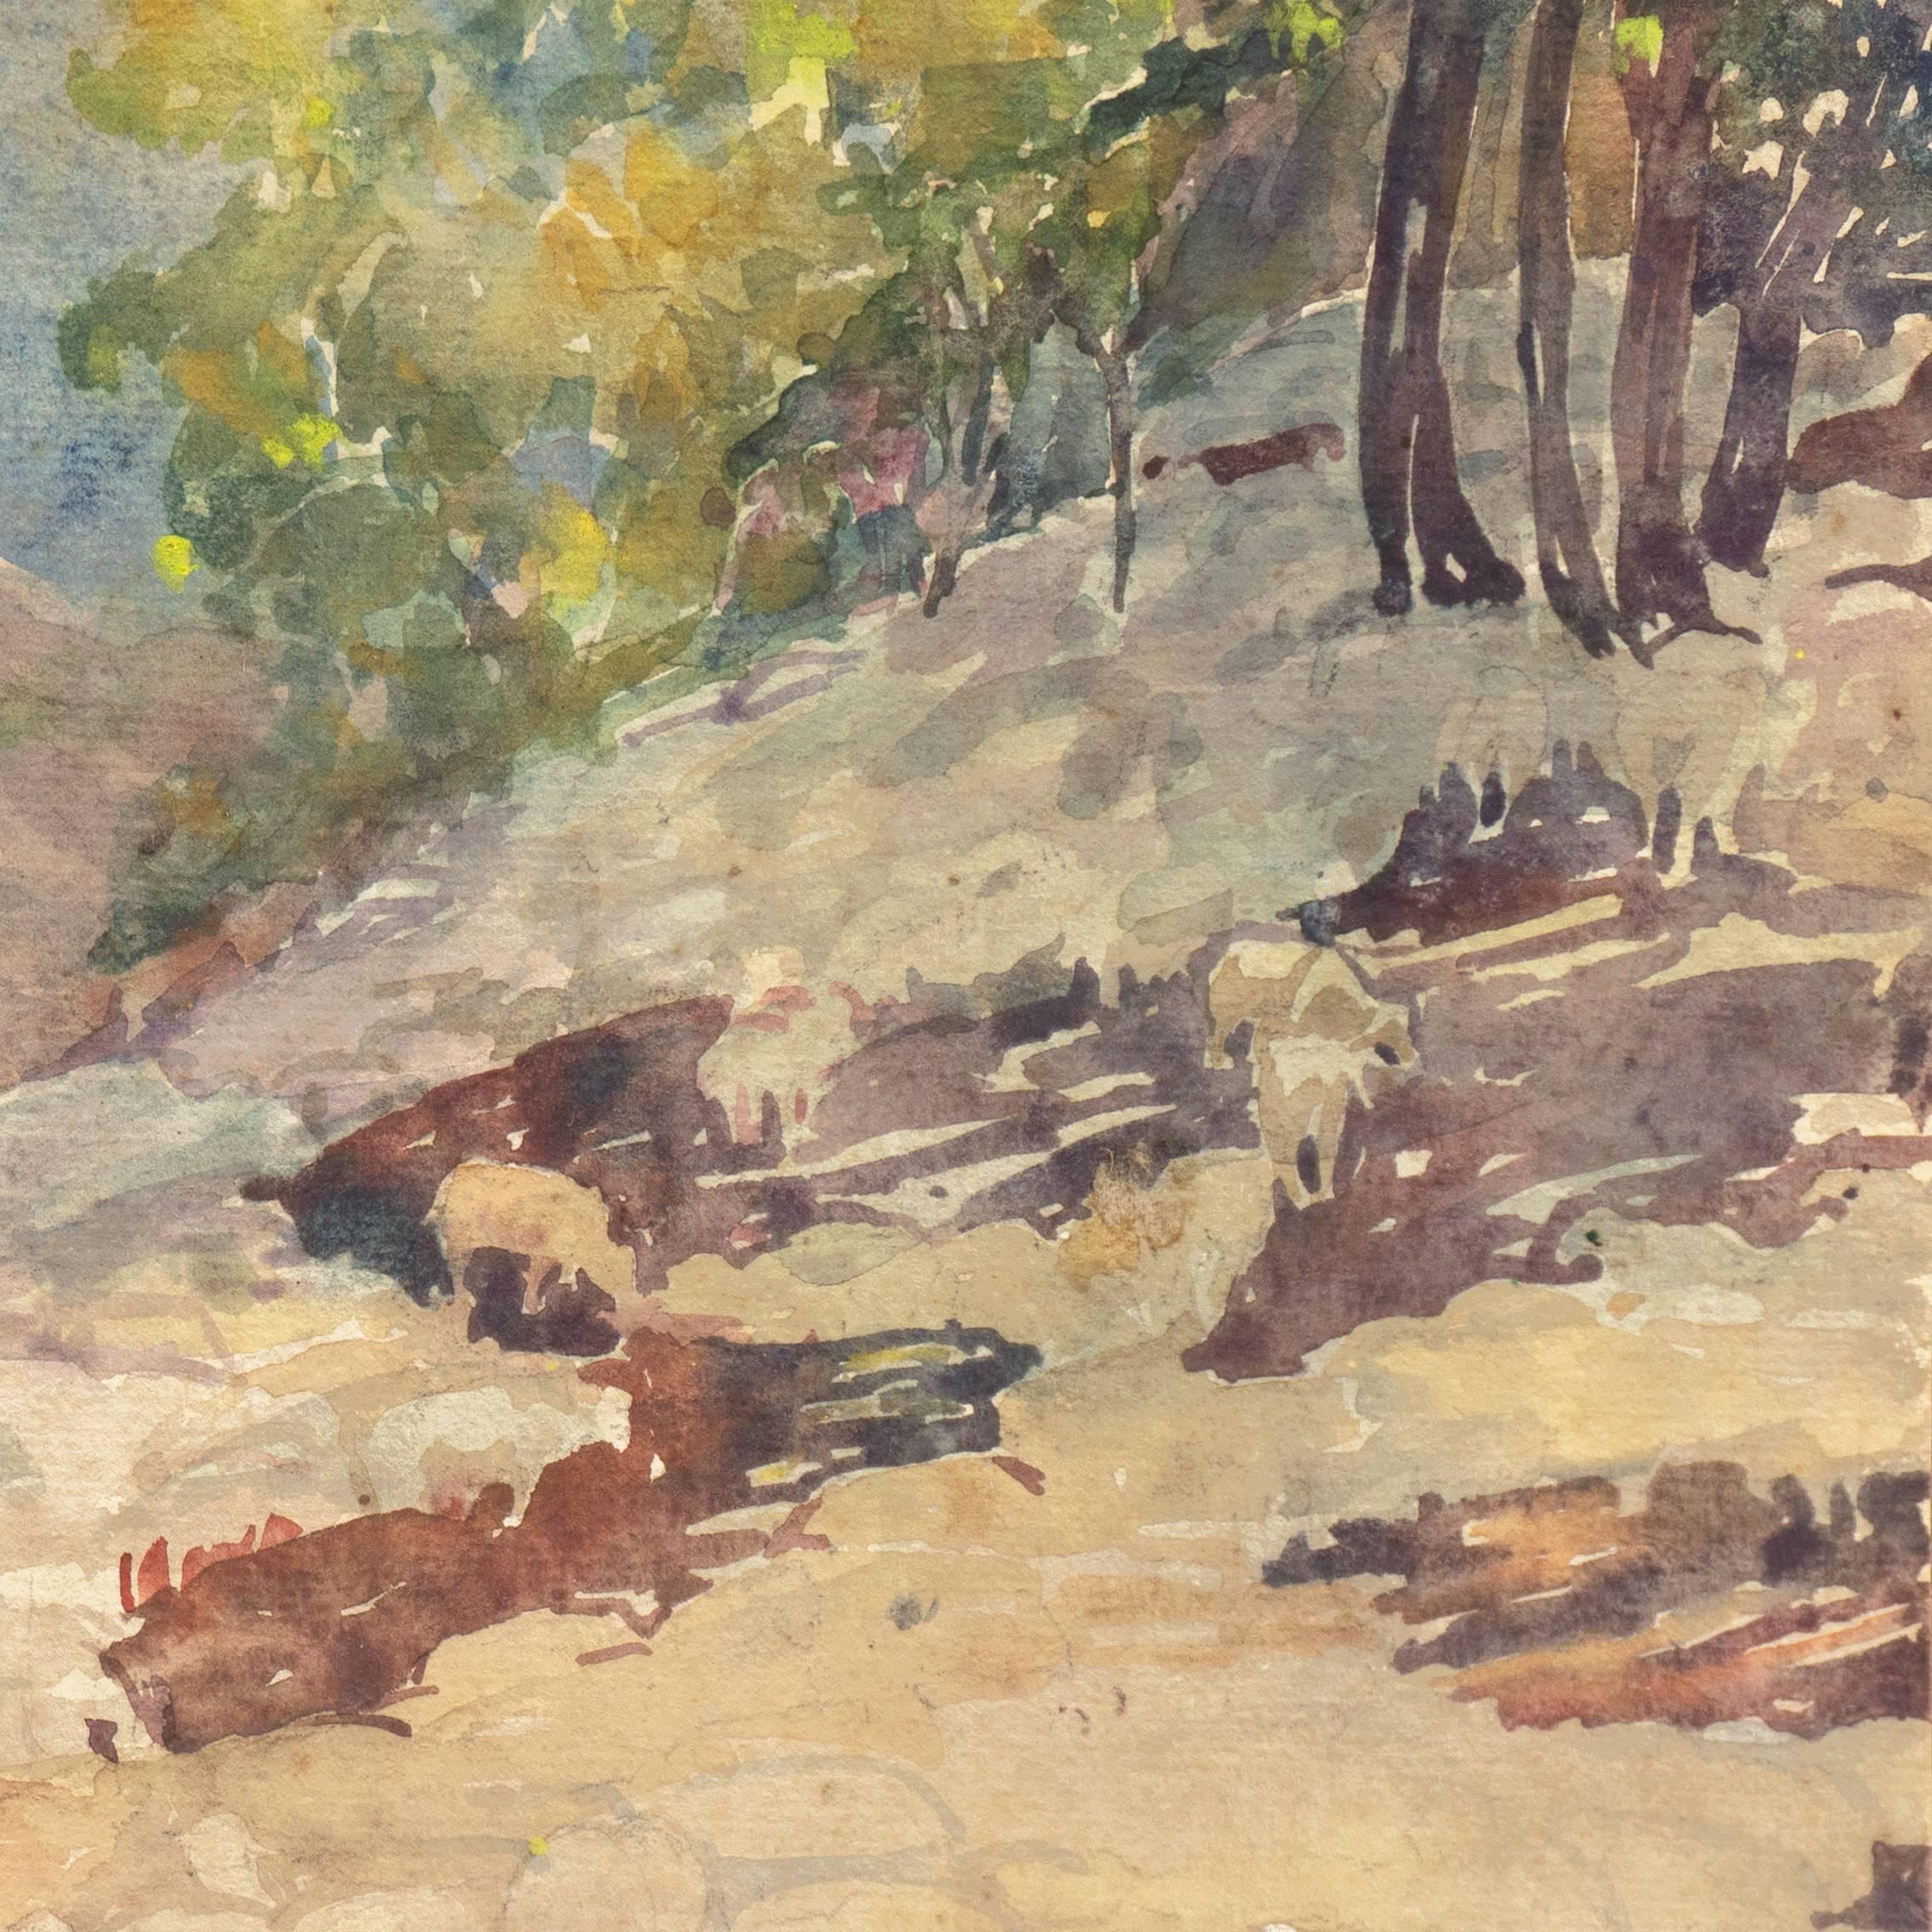 A period study showing a herd of sheep being corralled into a feeding area. 

Signed lower left, 'Sarah H. Hobson' and painted circa 1935.

Sarah Villarette Hoover Hobson studied at the Art Institute of Chicago in the 1920s before moving to